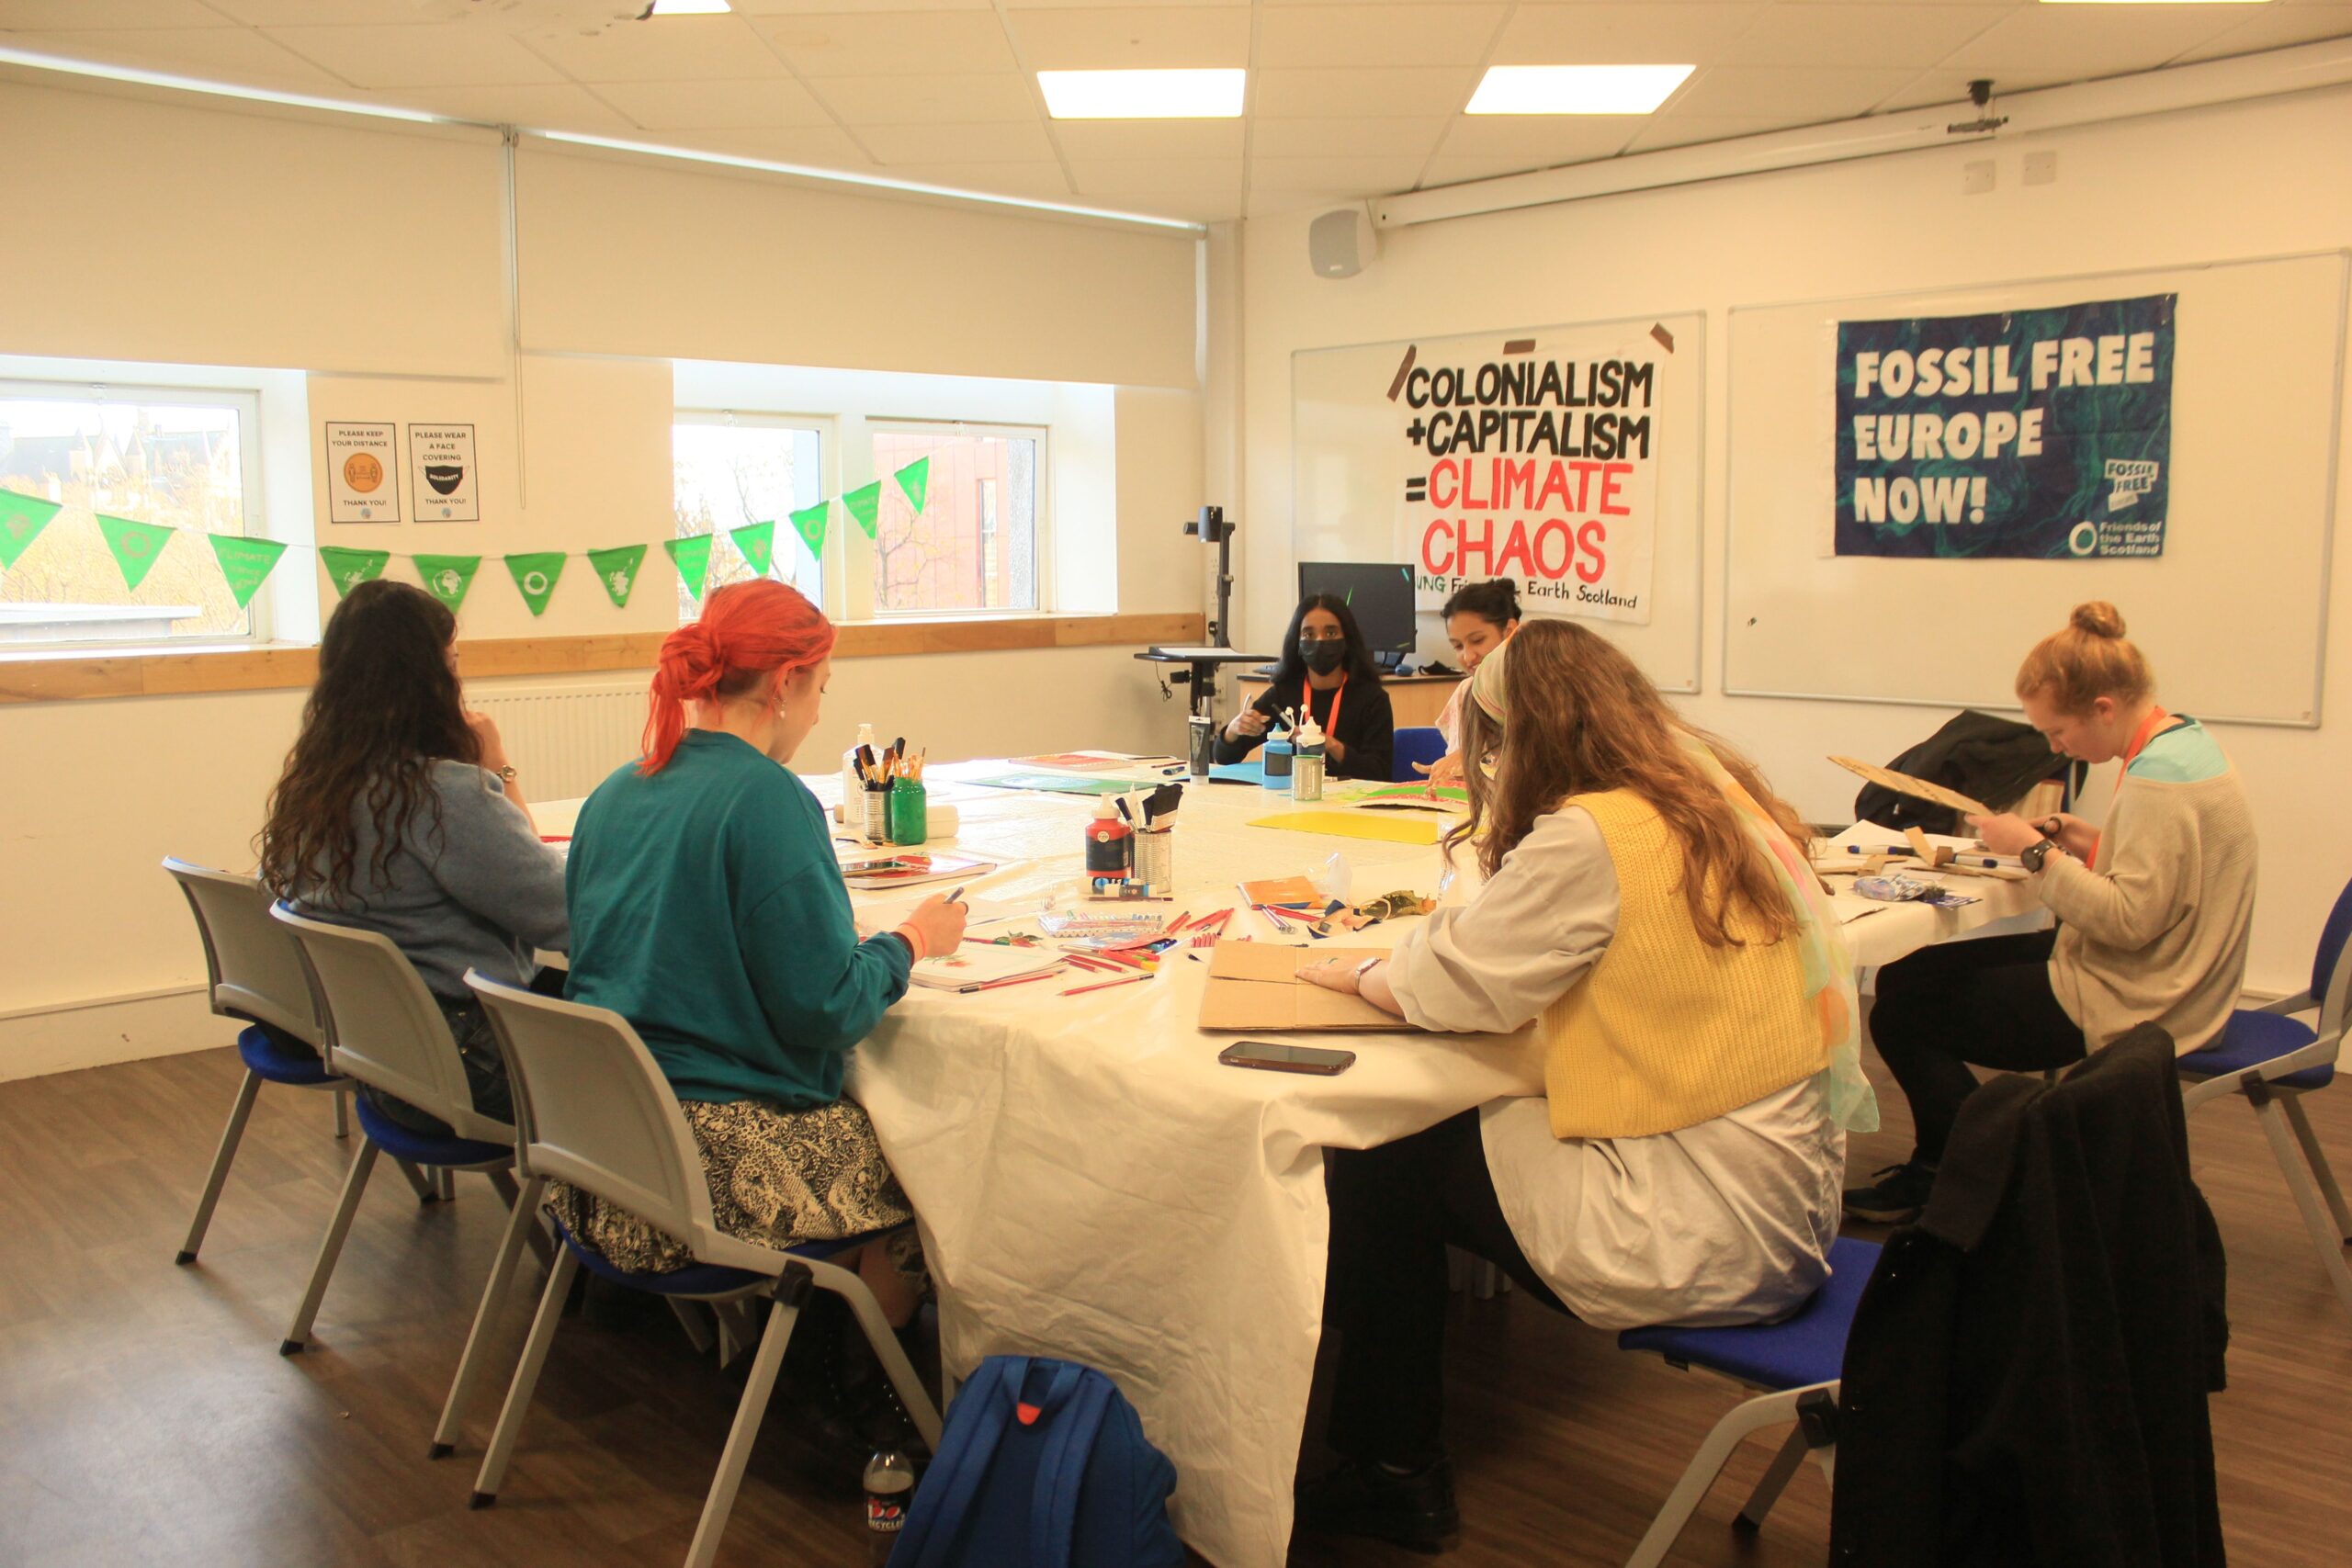 The image is of a group of people round a table creating zines